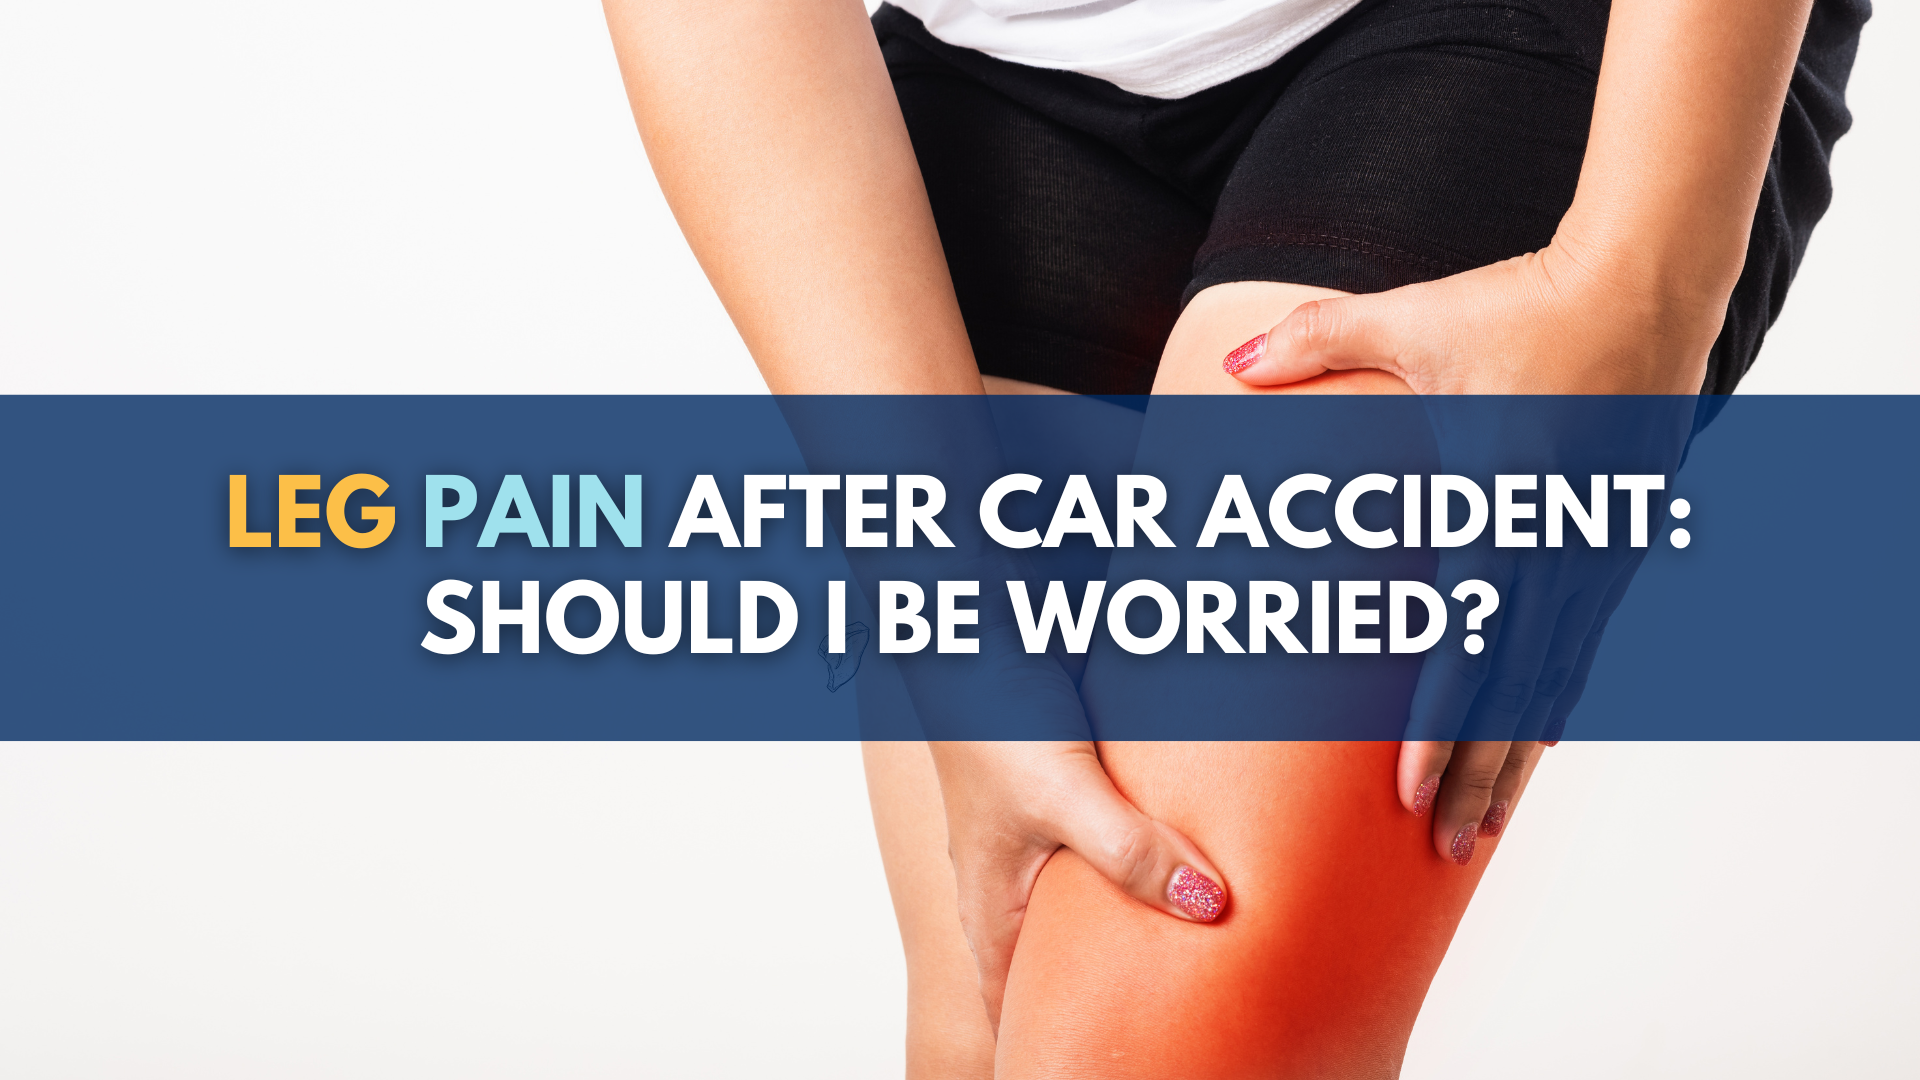 Ankle, Knee and Foot Injuries from Car Accidents